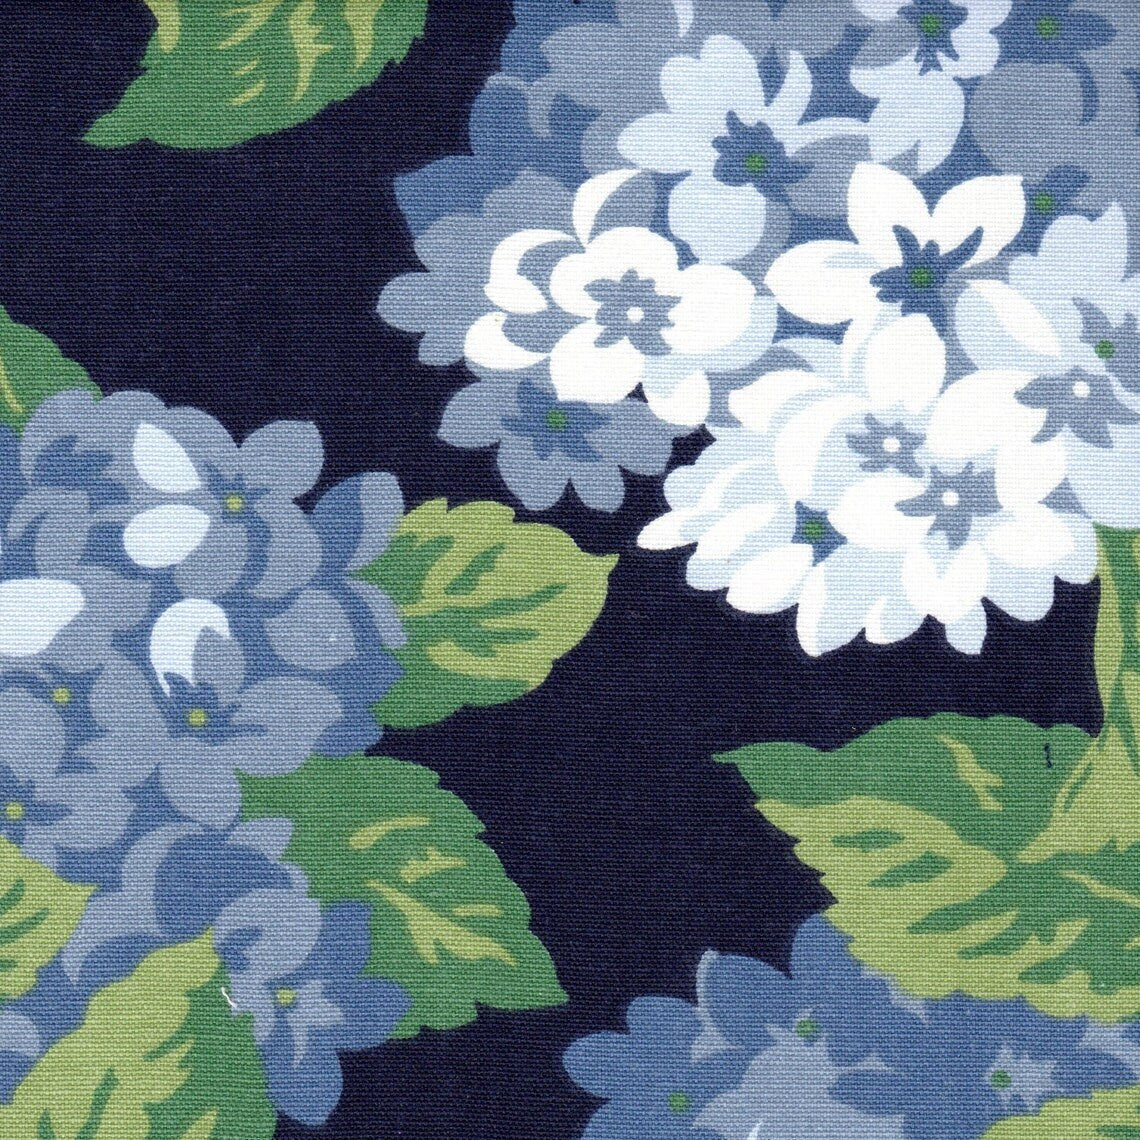 duvet cover in summerwind navy blue hydrangea floral, large scale